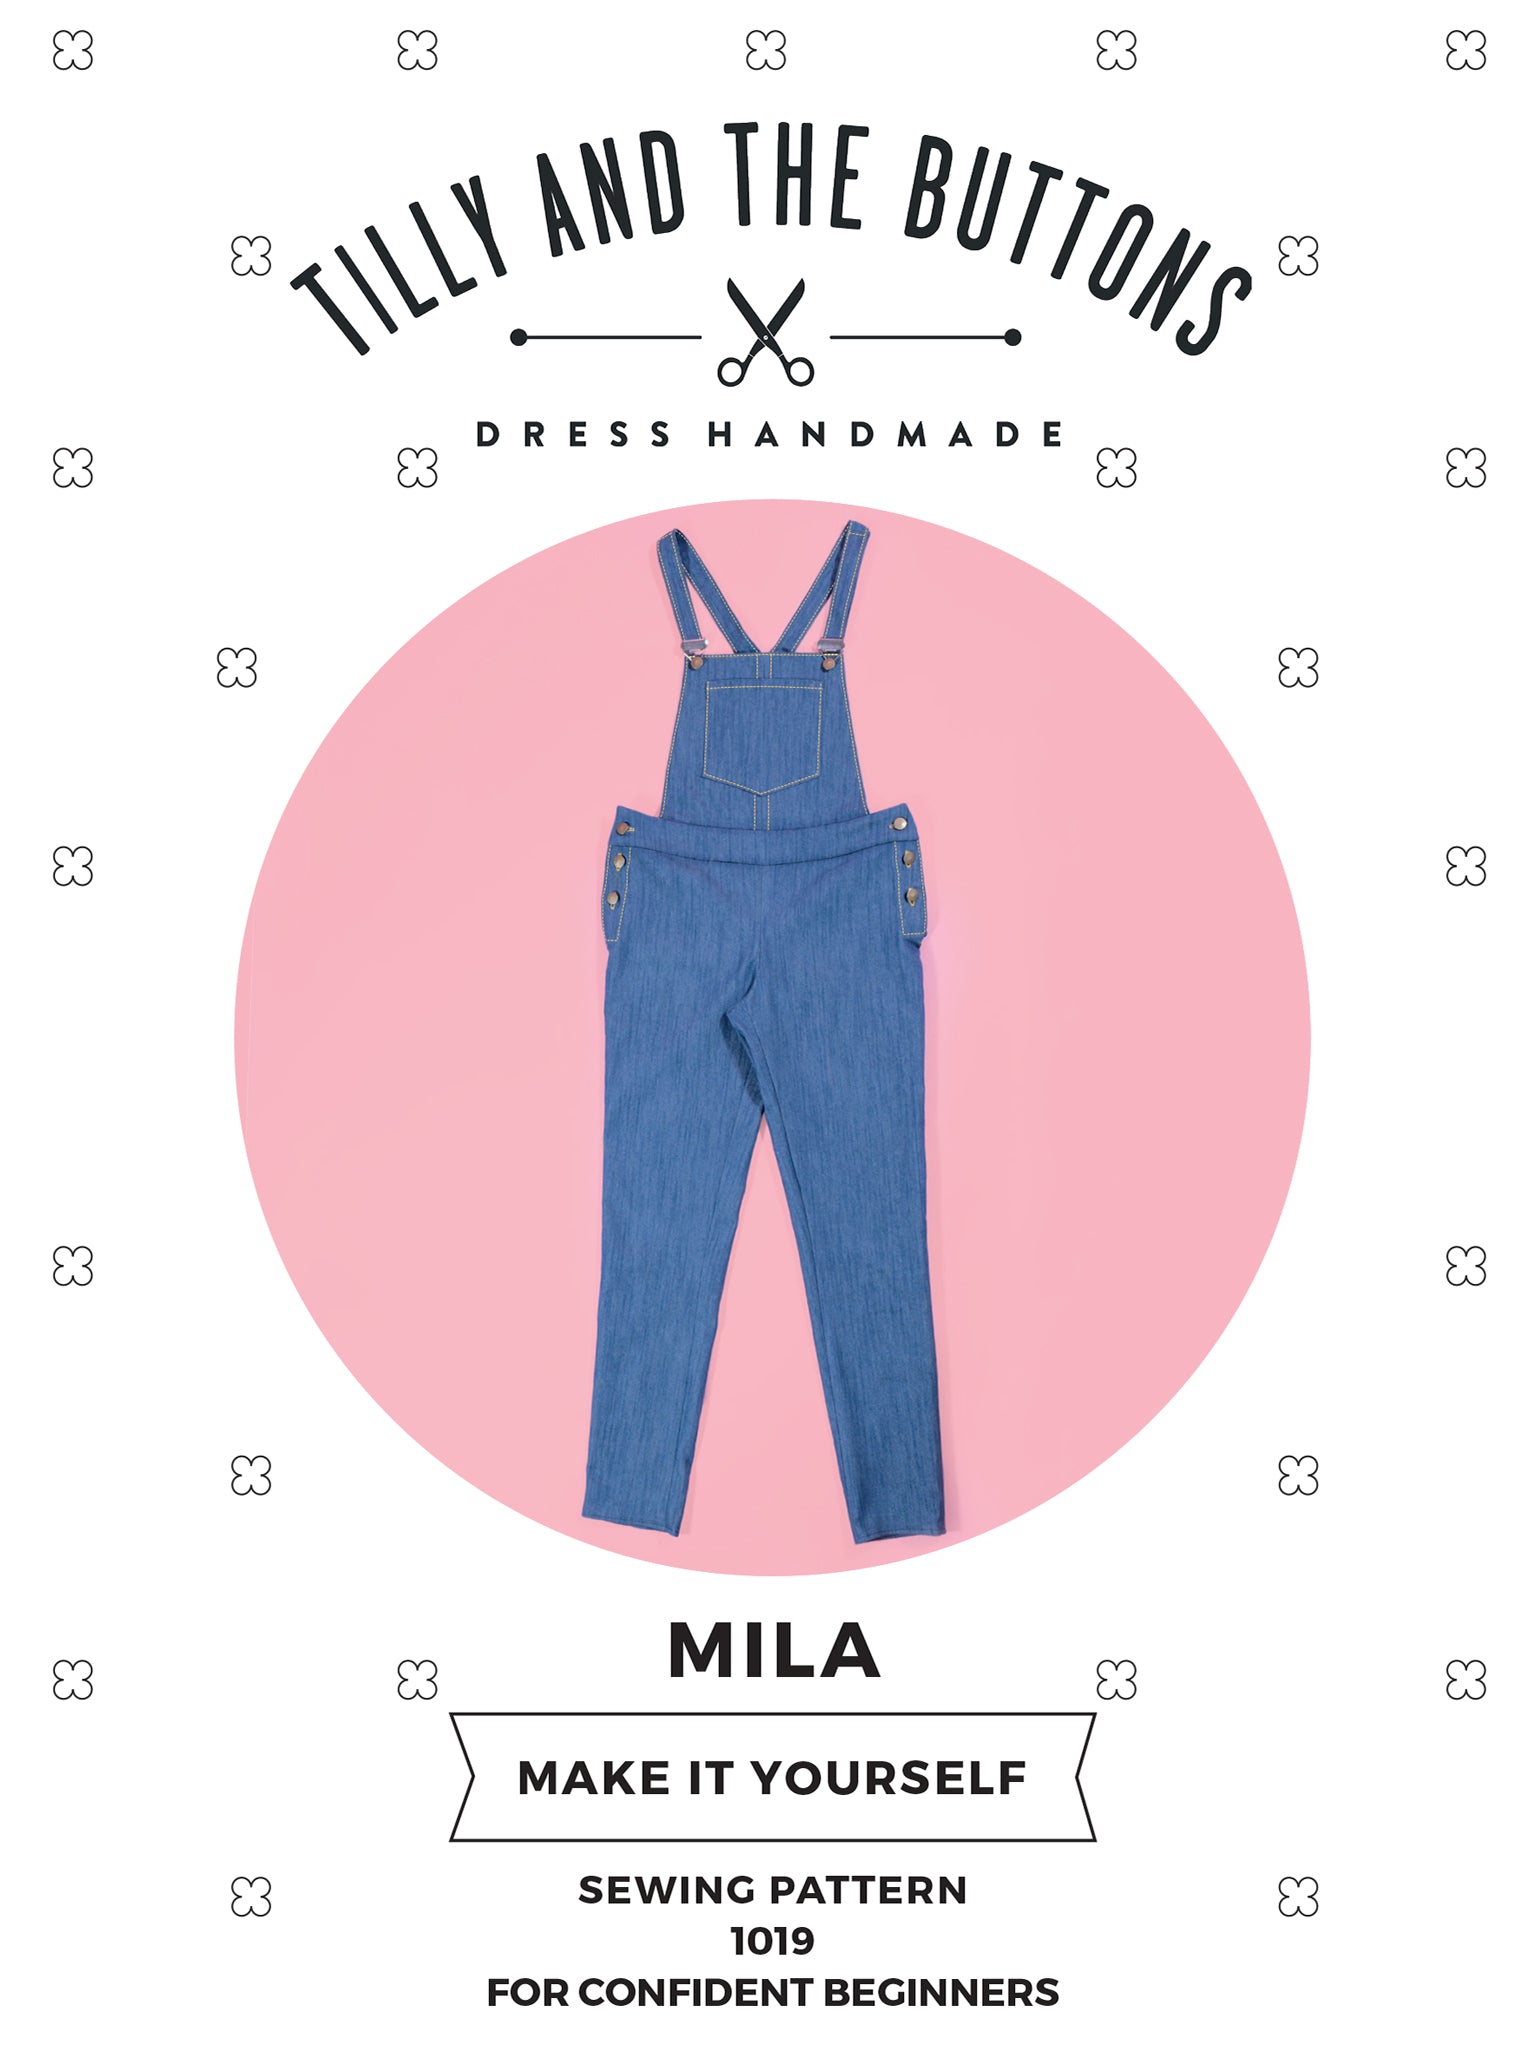 Tilly and the Buttons - Mila Dungarees Sewing Pattern